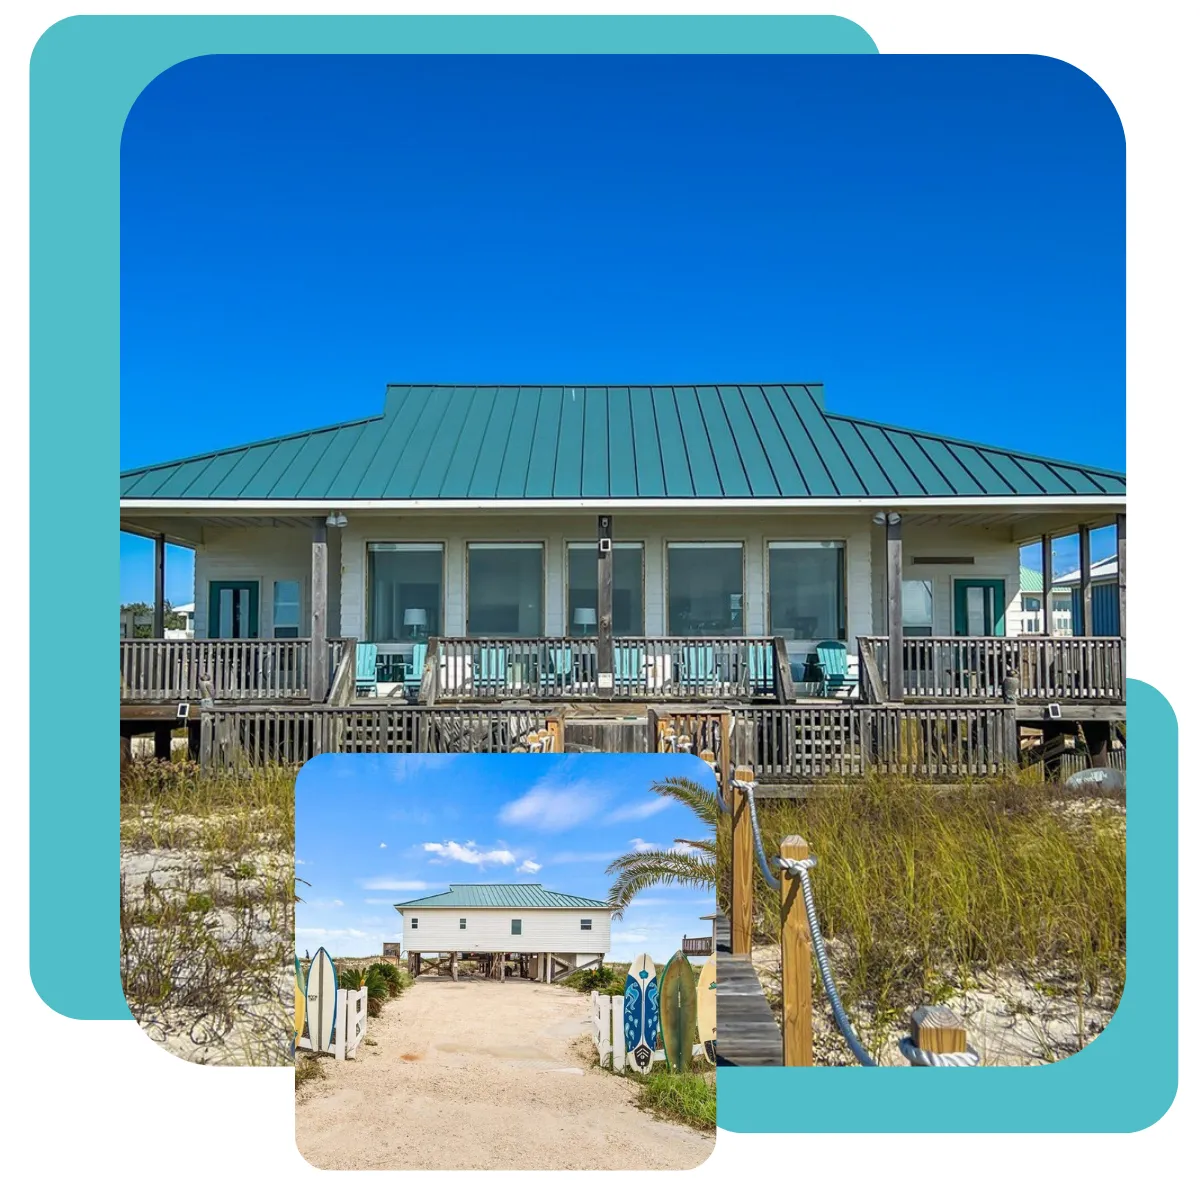 Experience coastal luxury at Surfside Paradise, nestled near Gulf Shores. Enjoy private beach access, stunning Gulf views from the double deck, and king suites with private decks. It's a coastal retreat you won't forget.